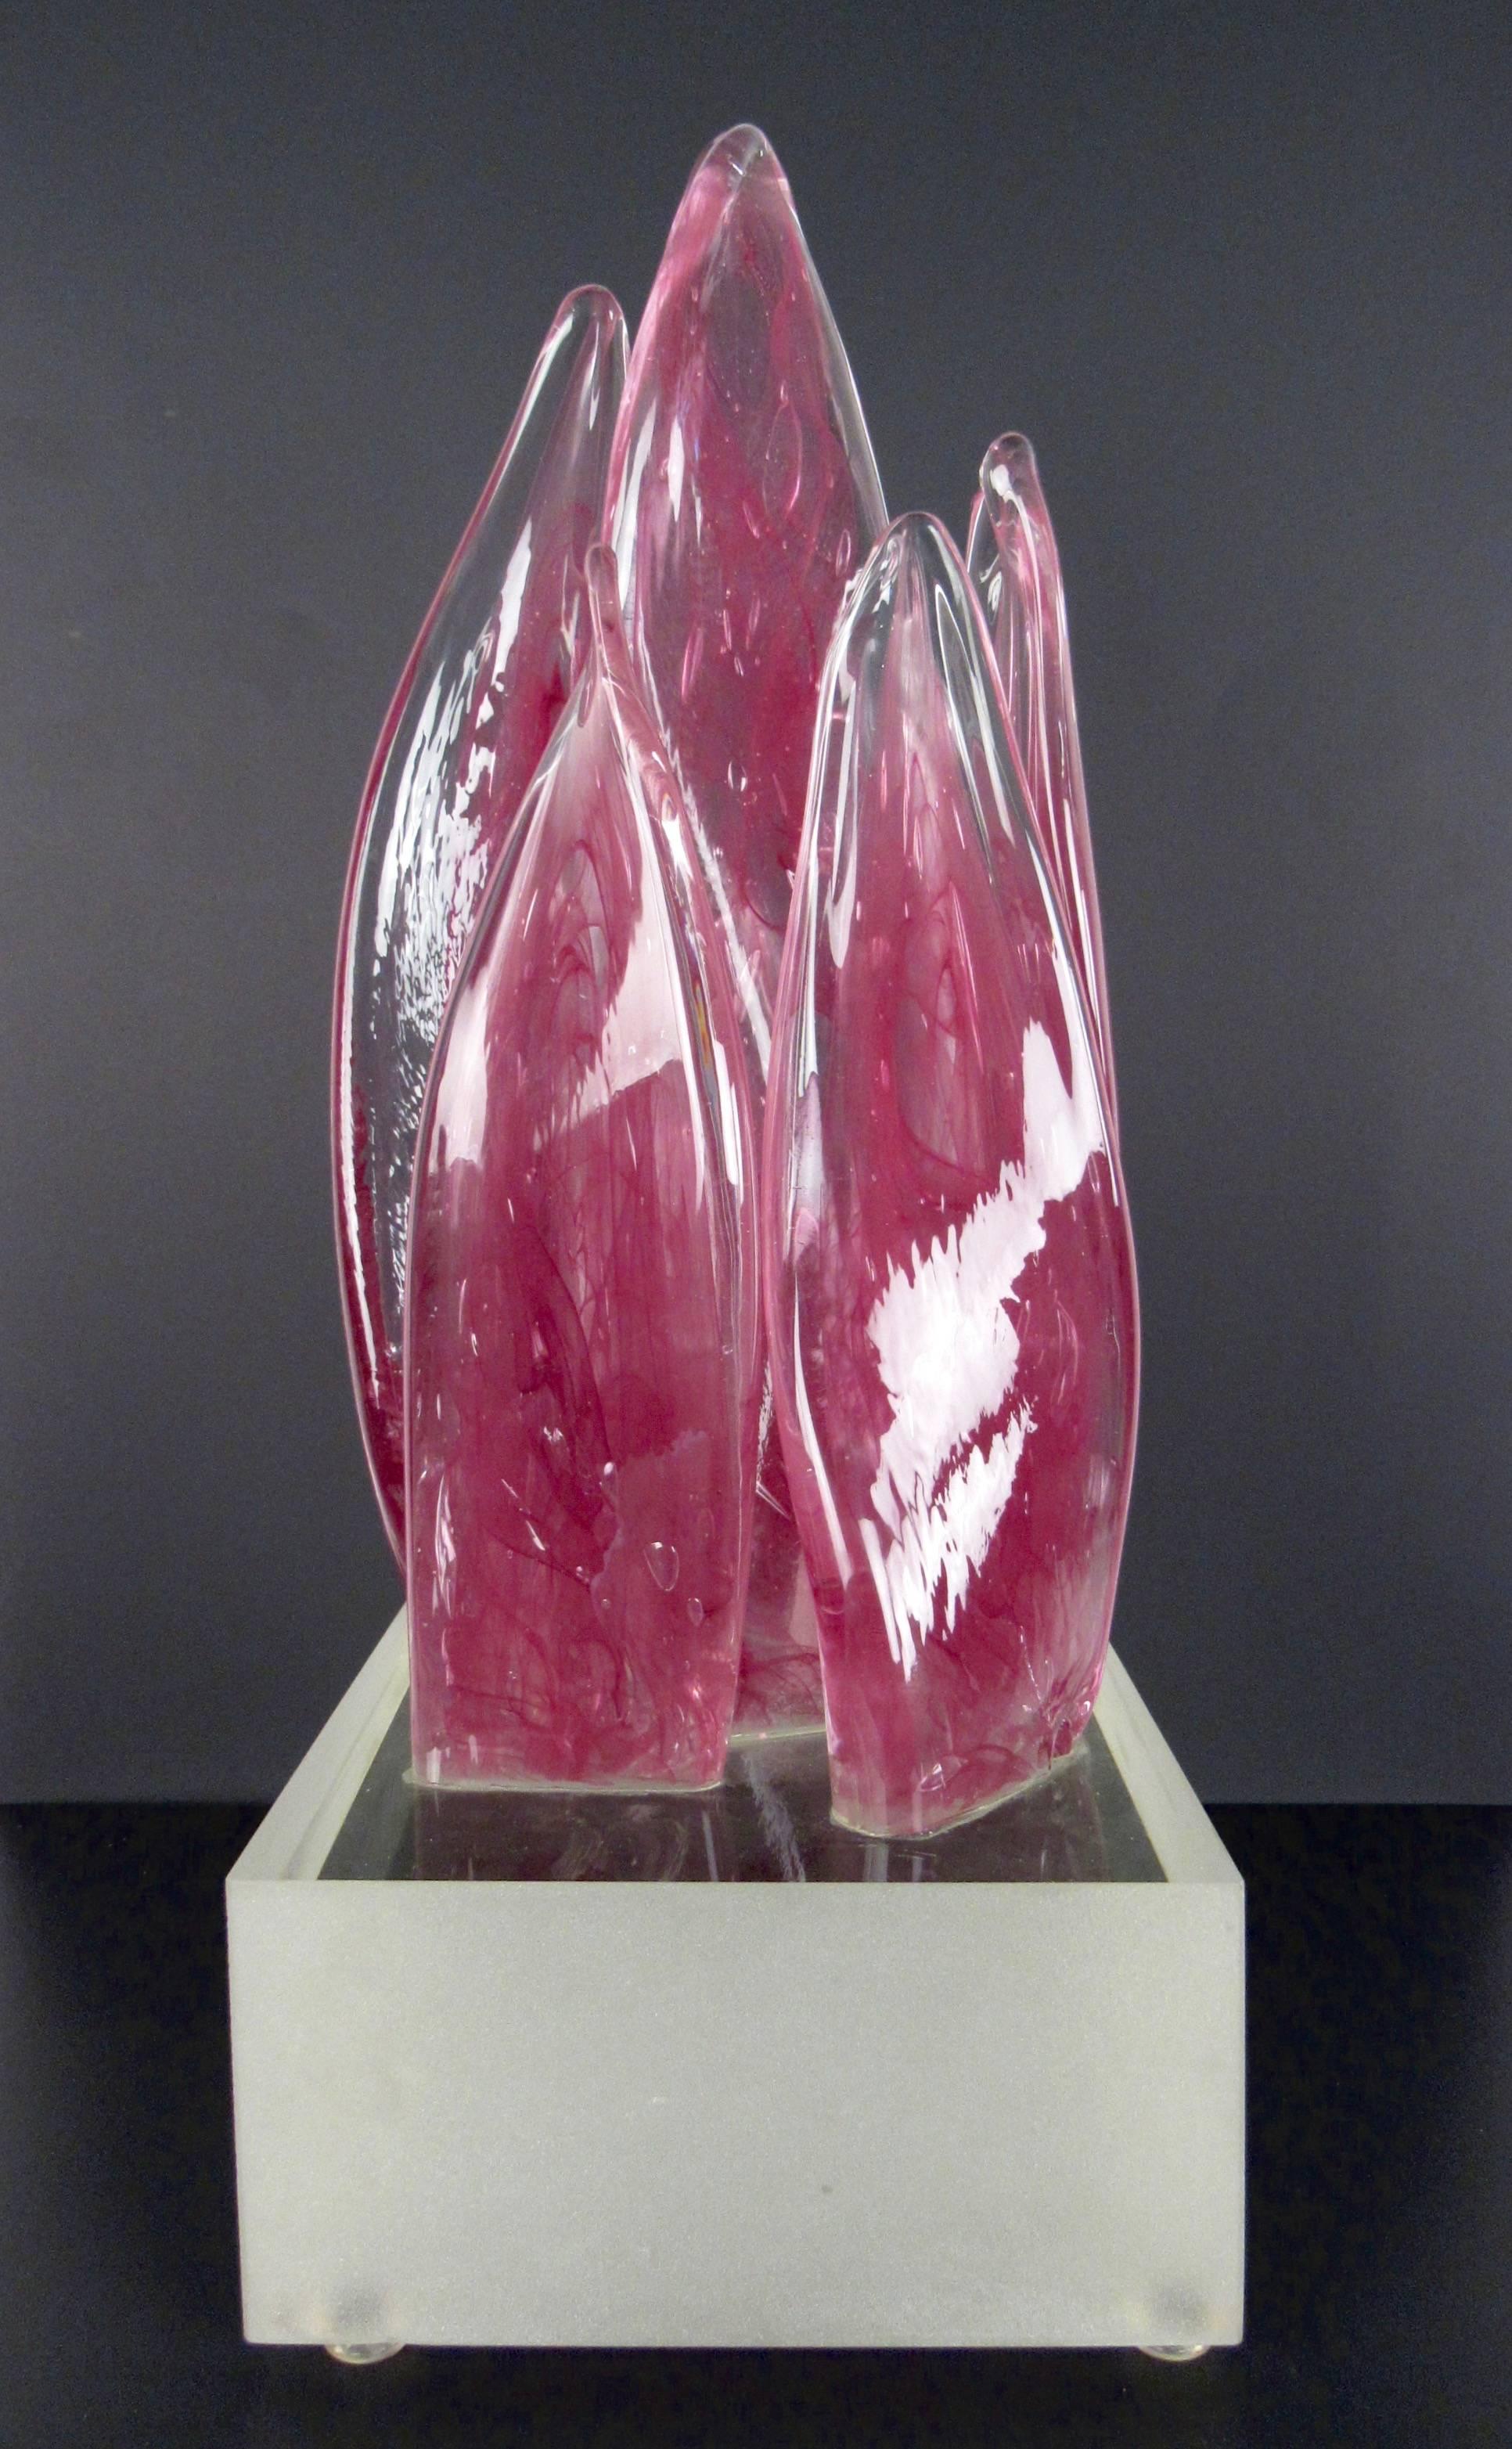 This unique sculpted art glass piece features a unique depiction of colored glass in a free flowing torch flame style design. Mounted carefully on a glass base this elegant modern art sculpture makes a unique addition to home or office decor. Please